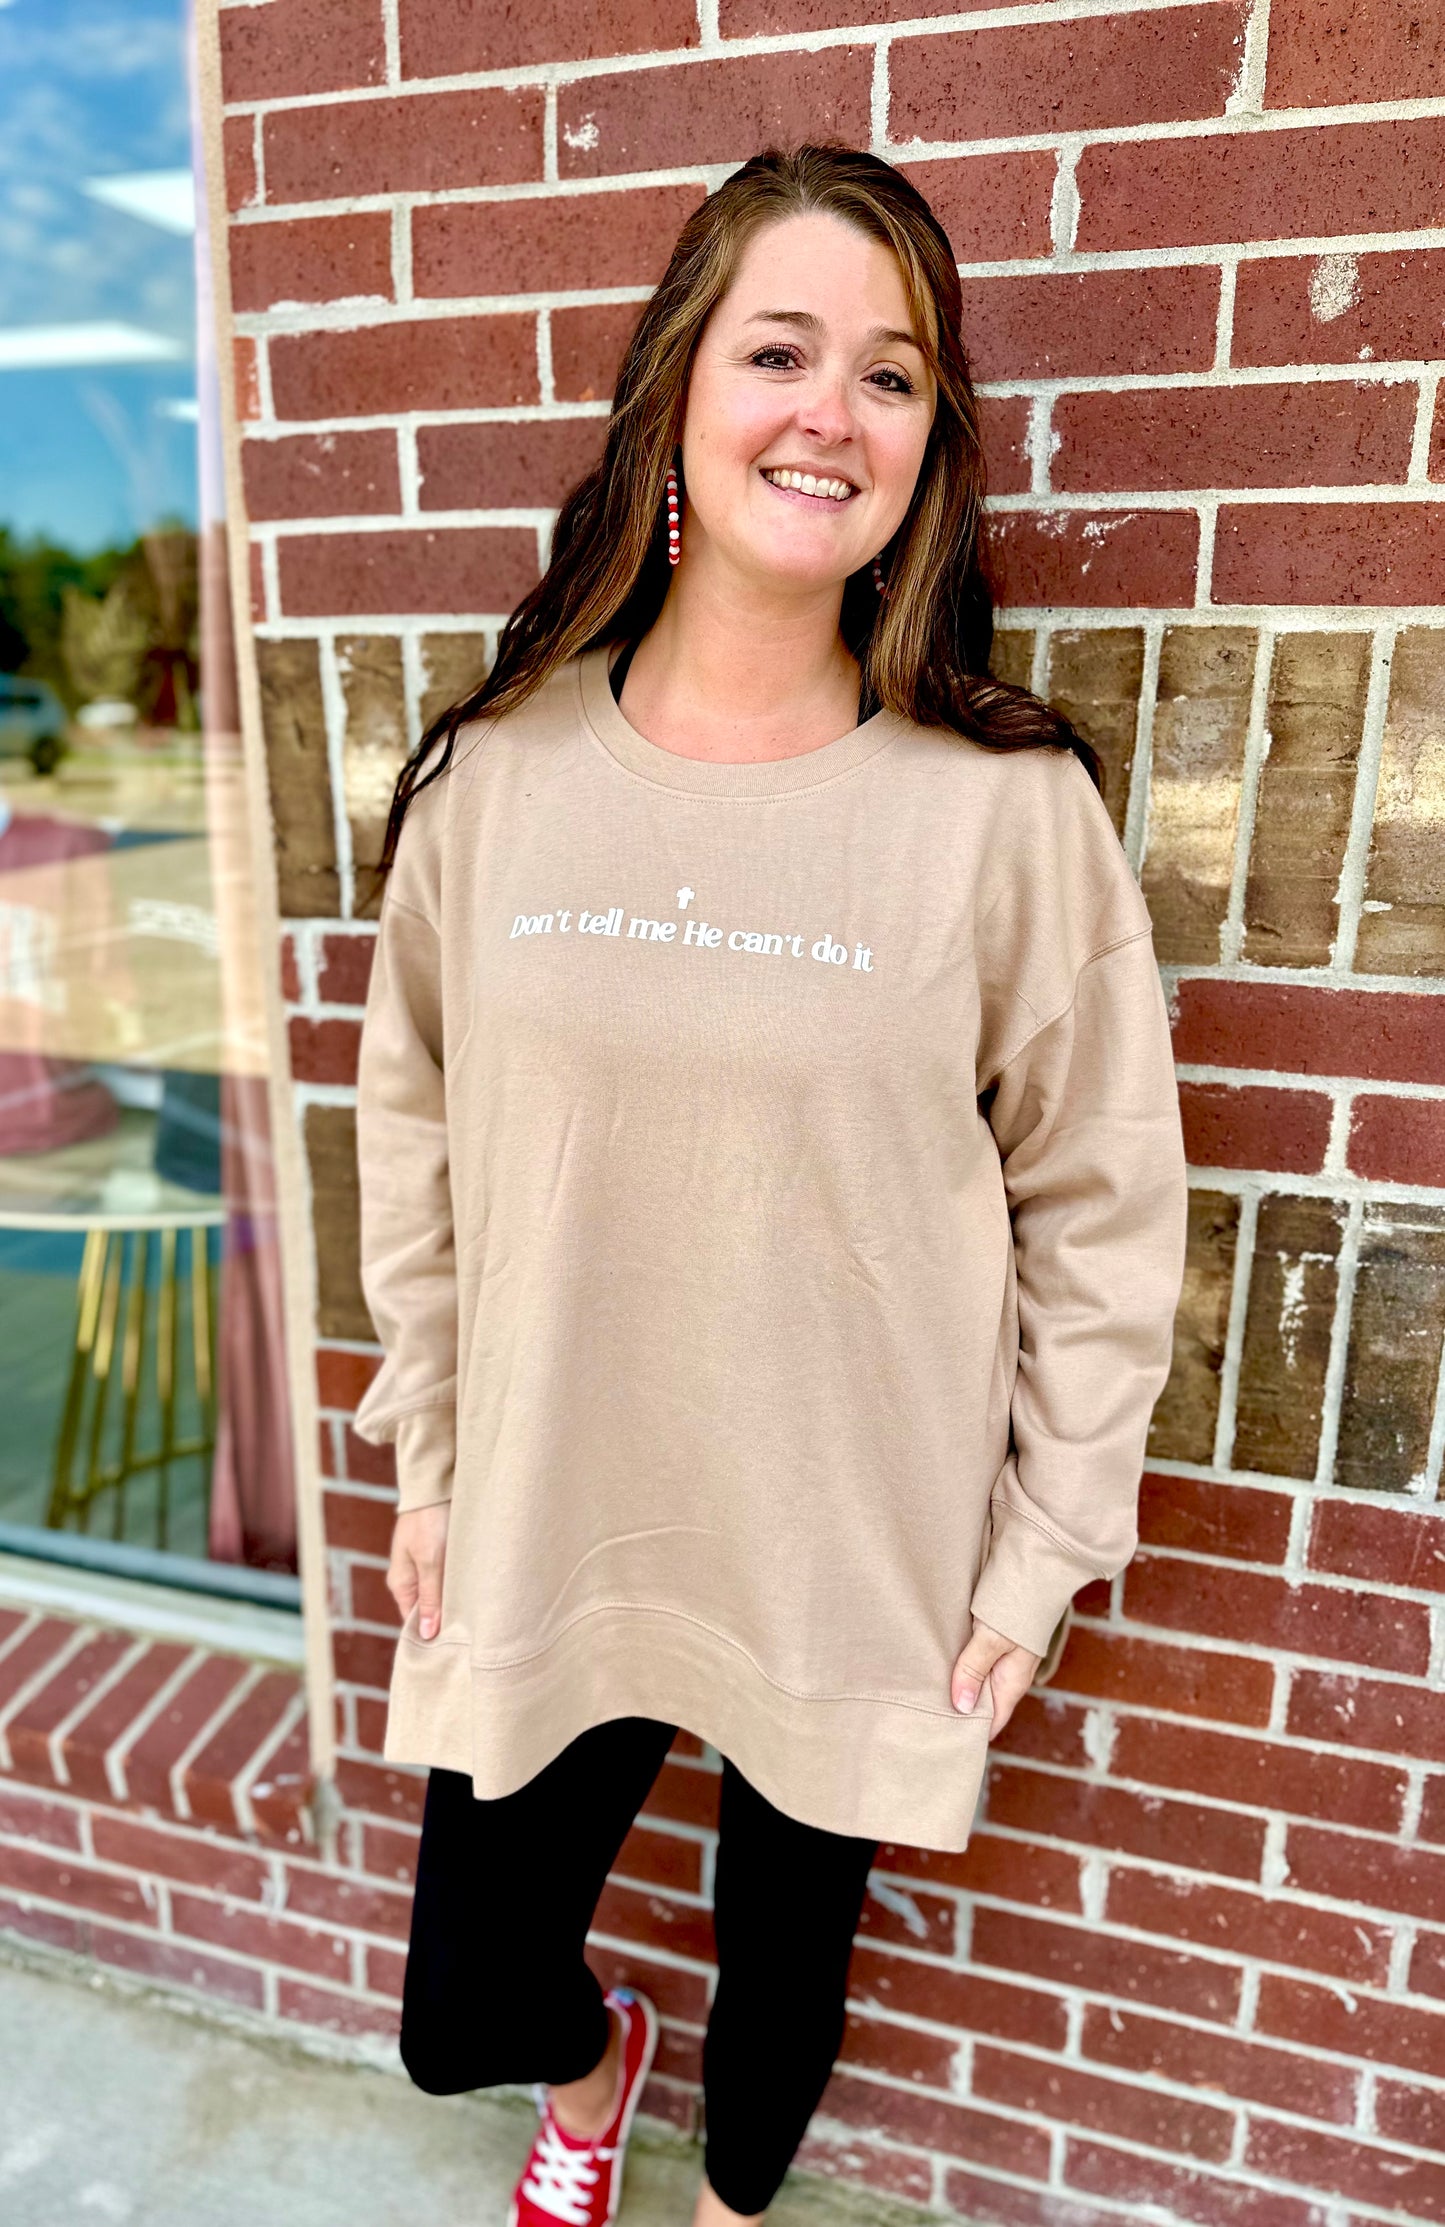 Don't tell me He can't do it-Puff Sweatshirt